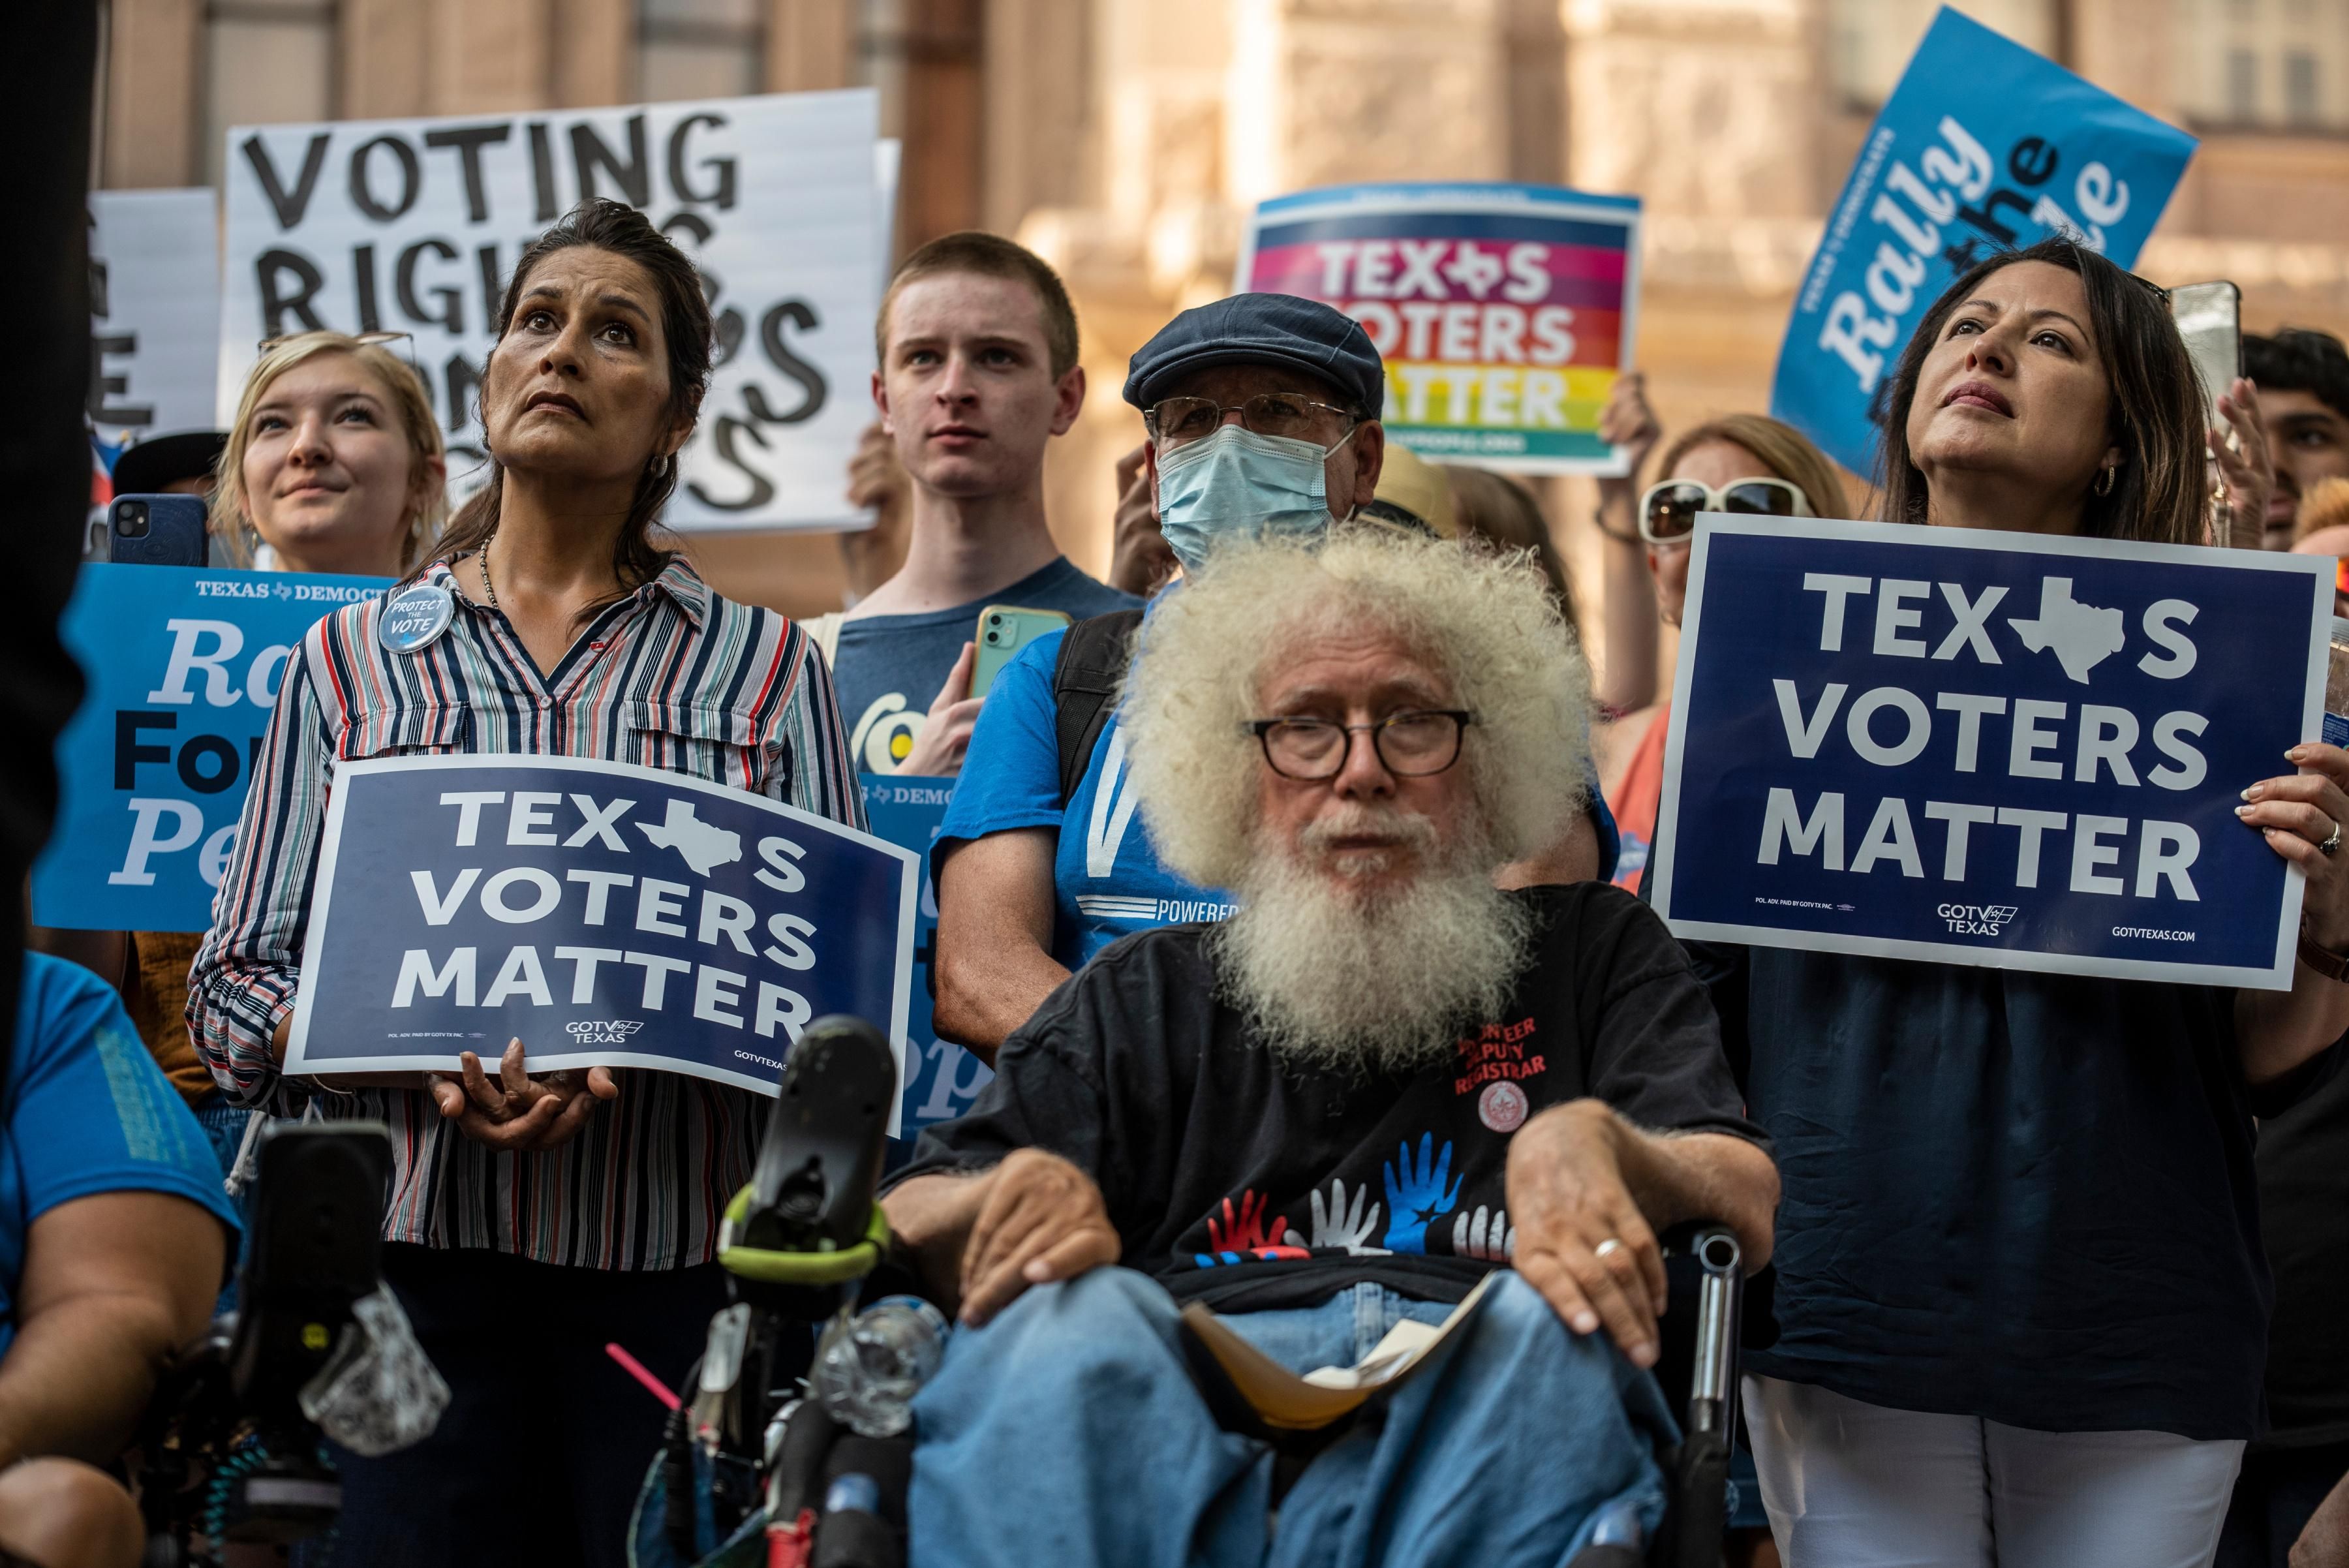 Texas voters demonstrate at the state capital